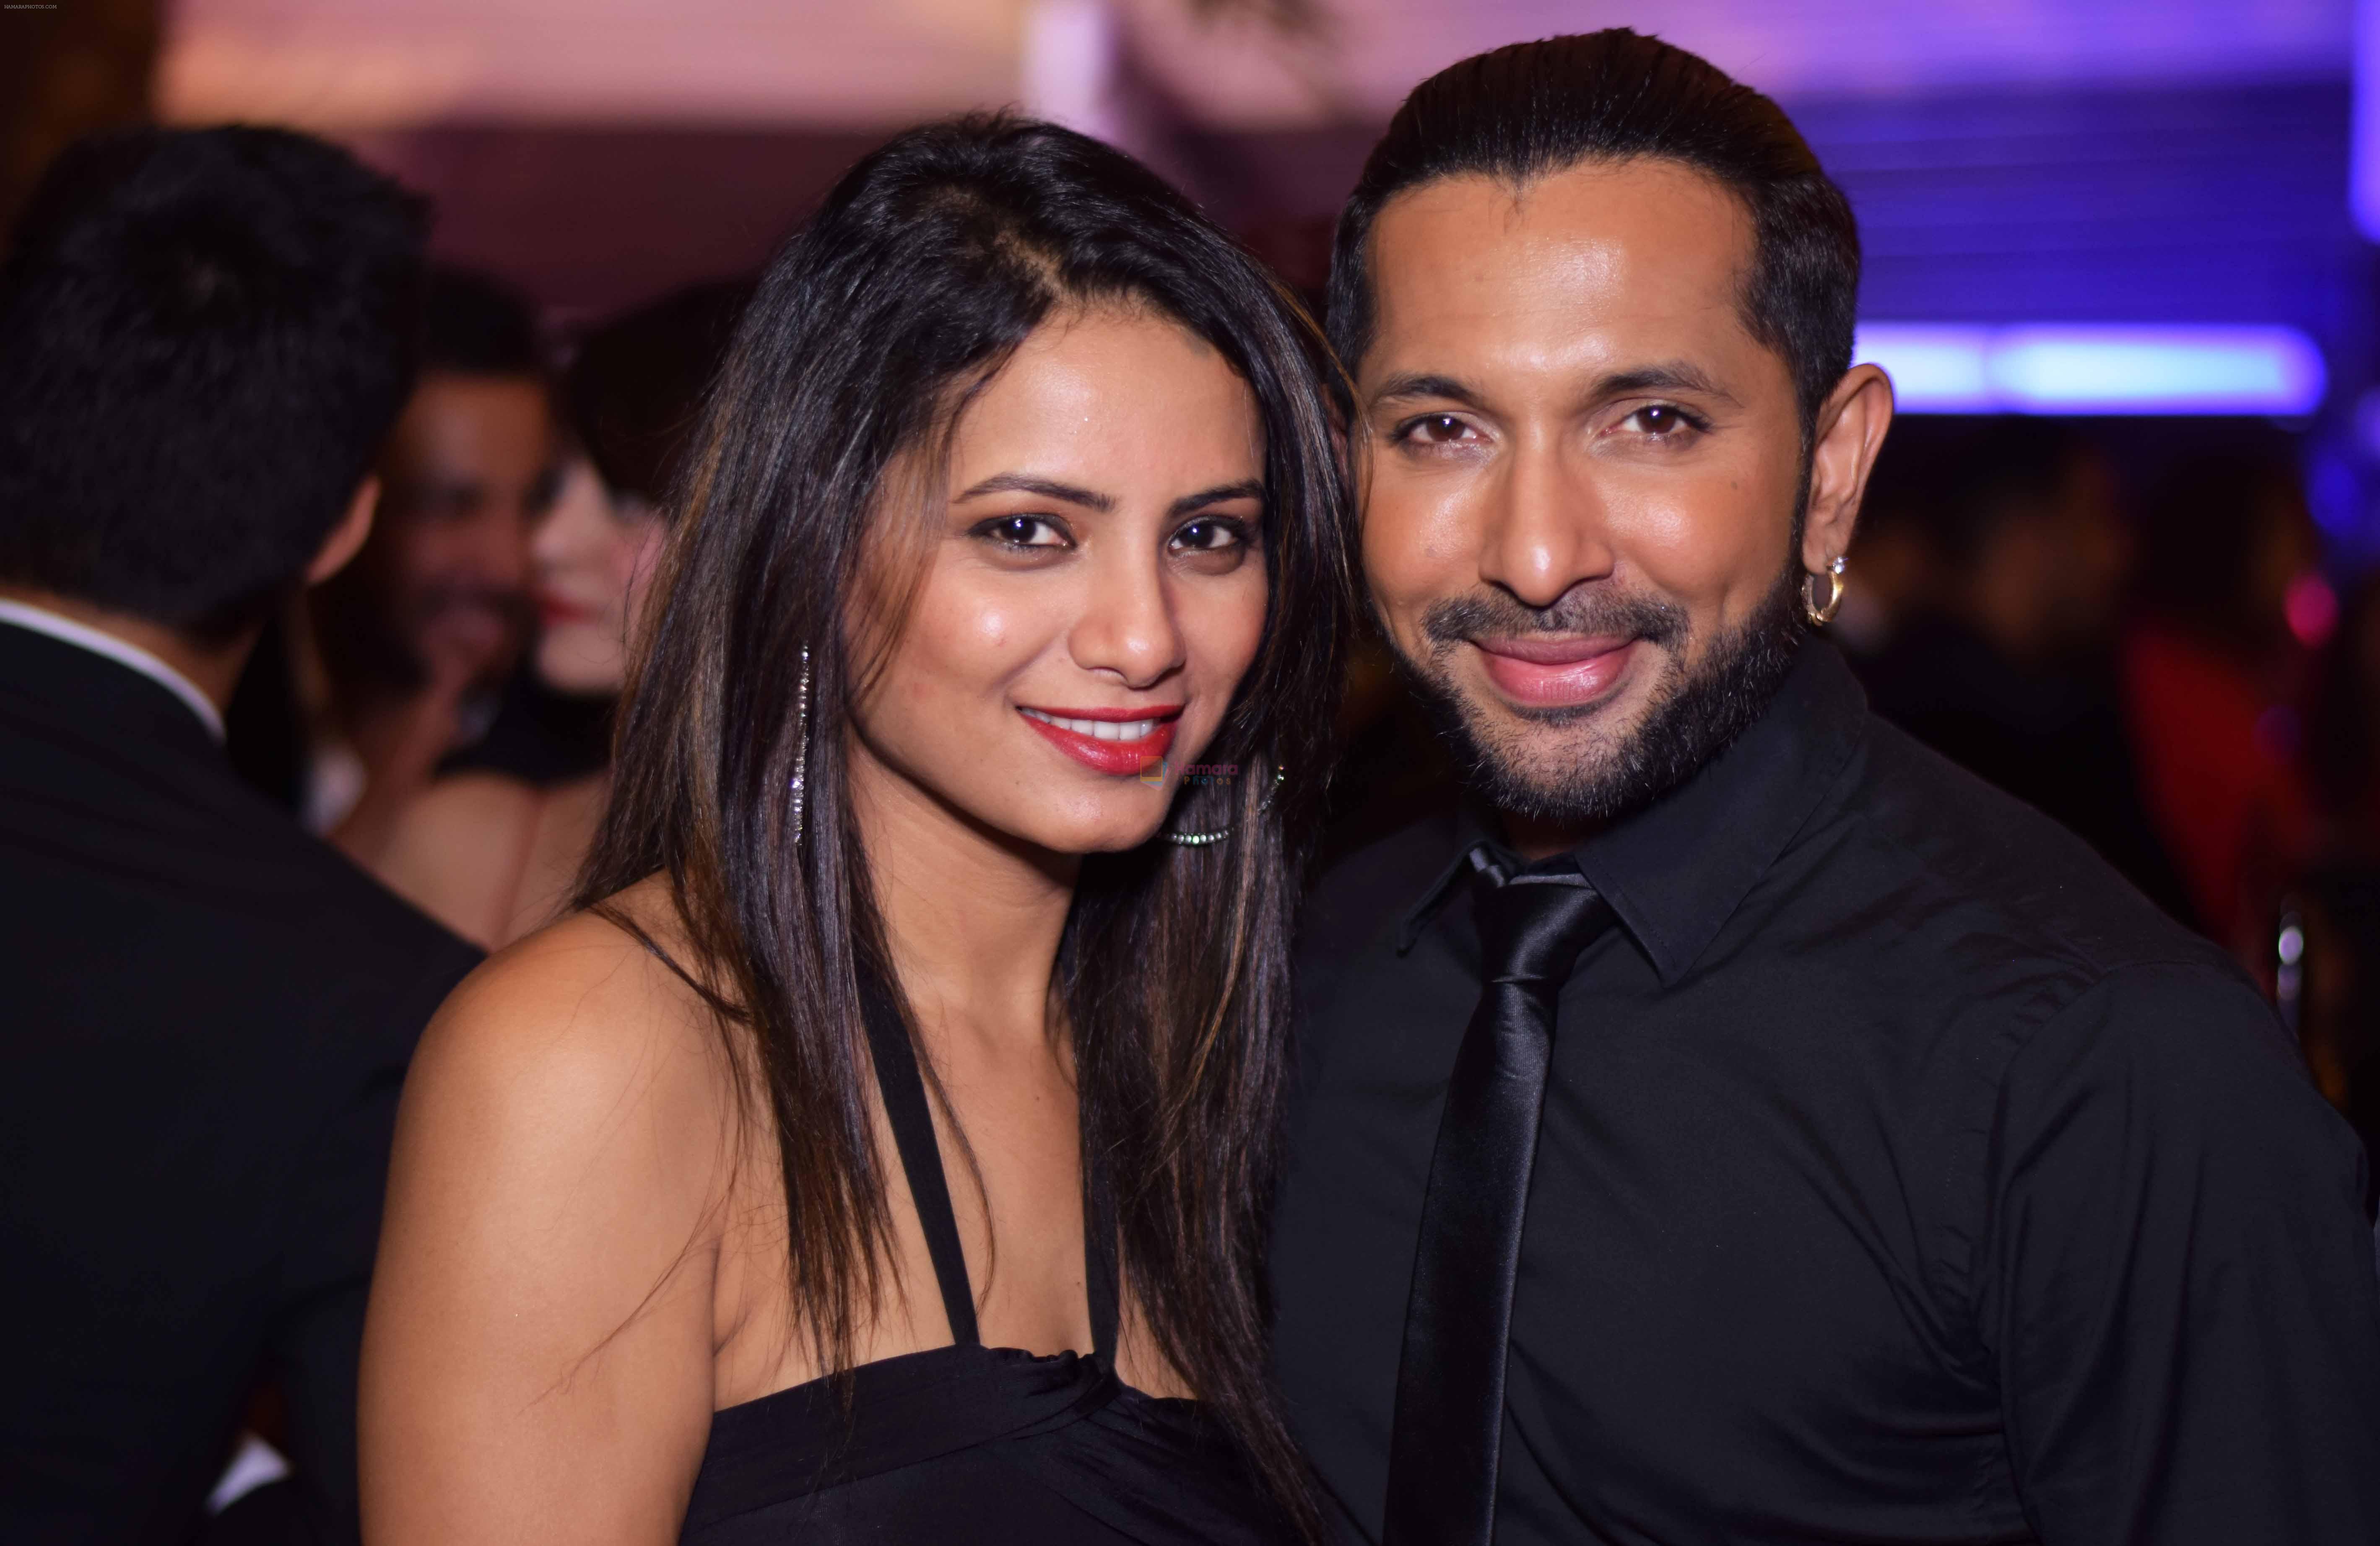 Terence Lewis with friend at Fashion Director Shakir Shaikh's Theme Based Festive Party at Opa! Bar Cafe